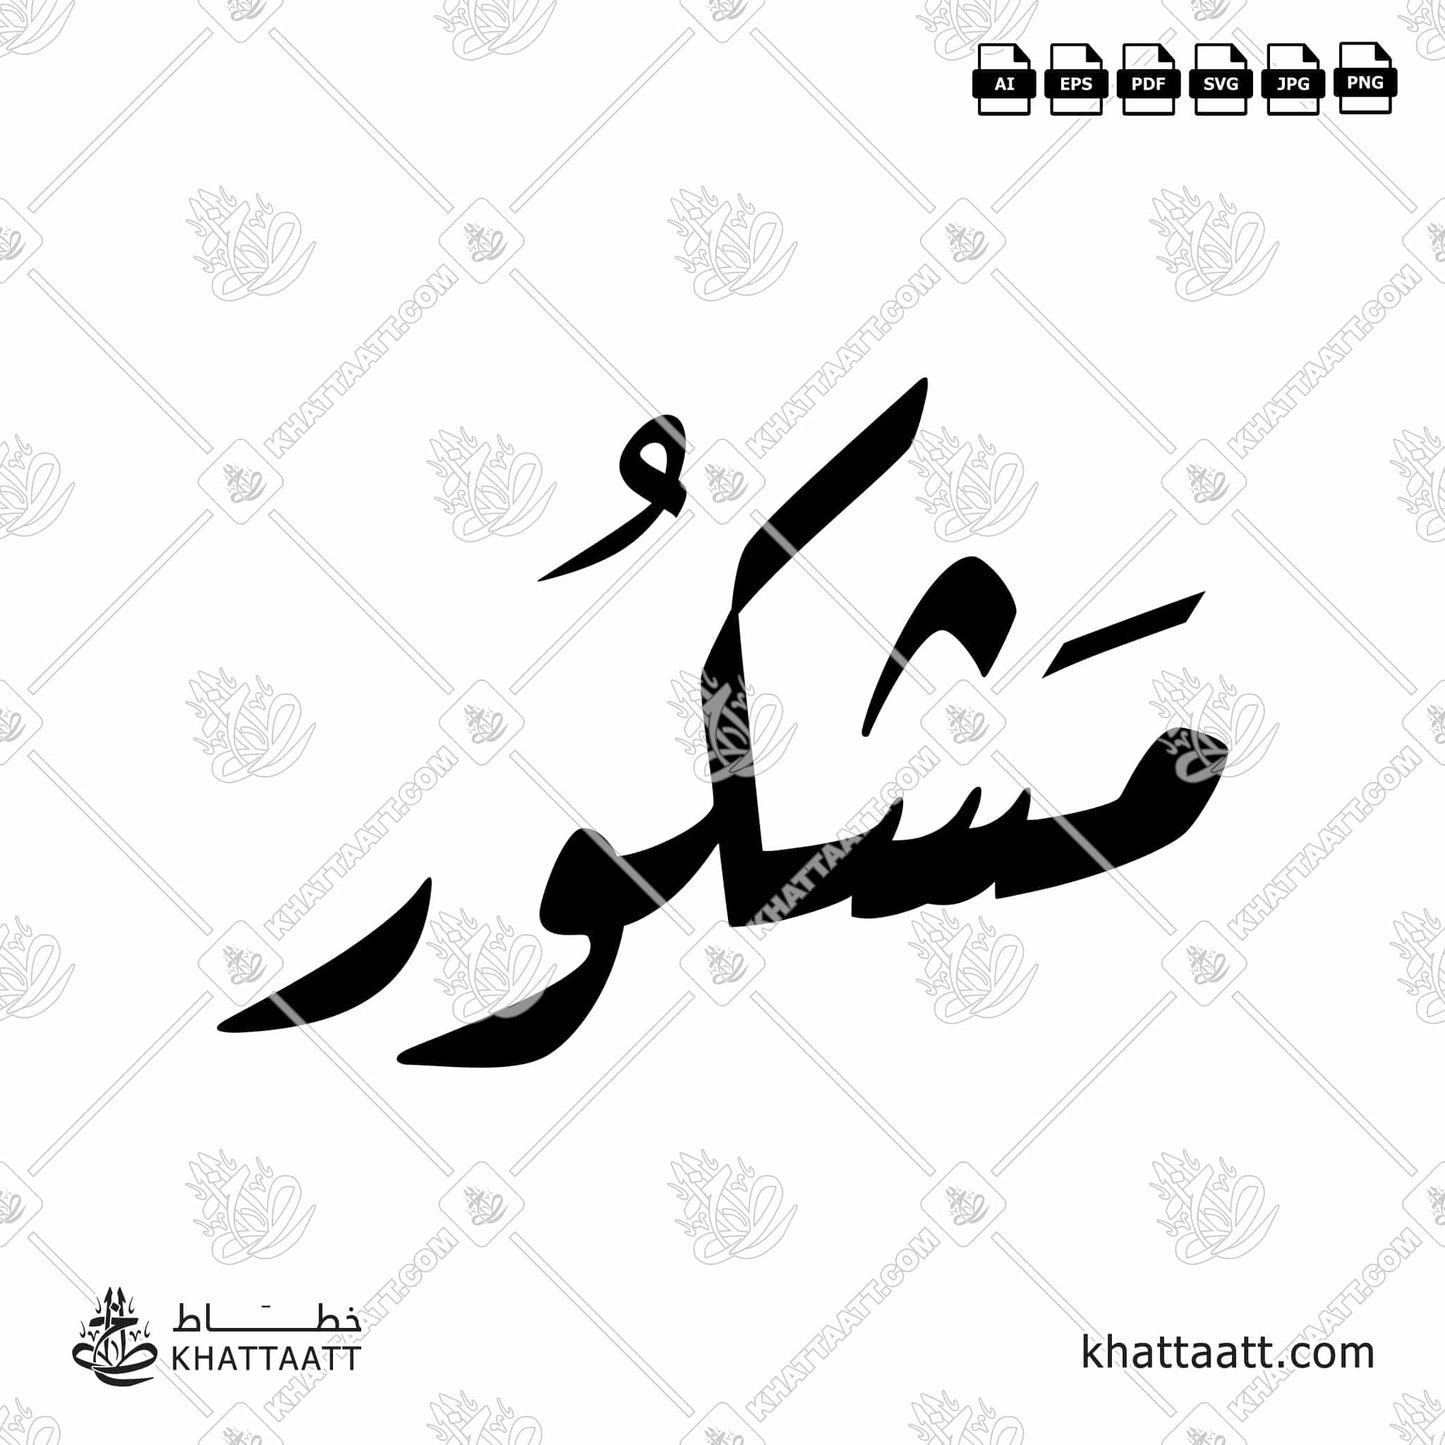 Arabic Calligraphy of مشكور mashkur, it used to give thanks in some Arab countries.